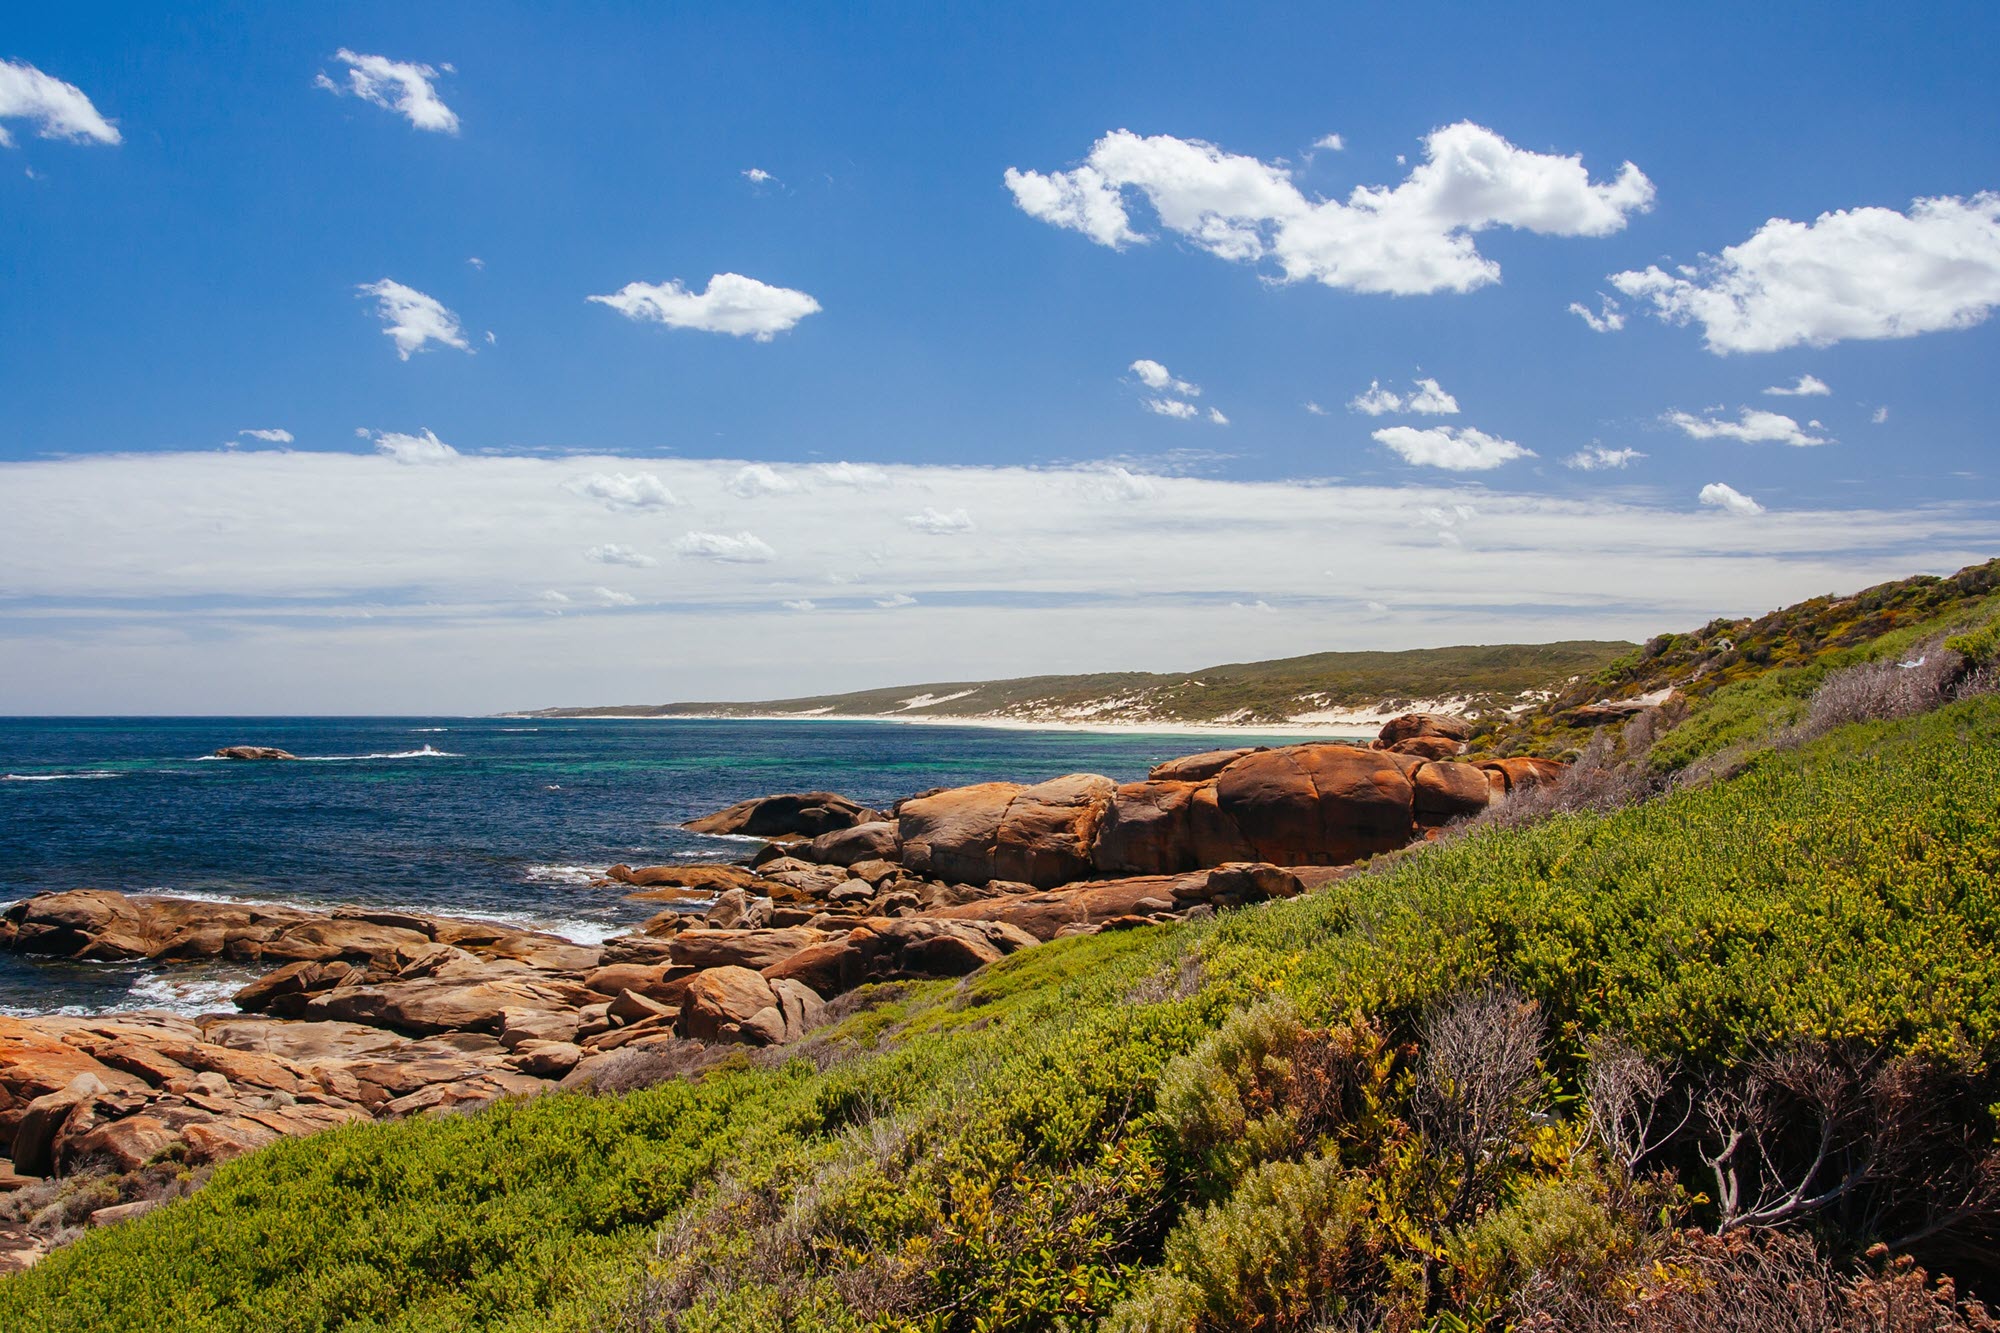 Views on a sunny day over a beach in Margaret River, WA.